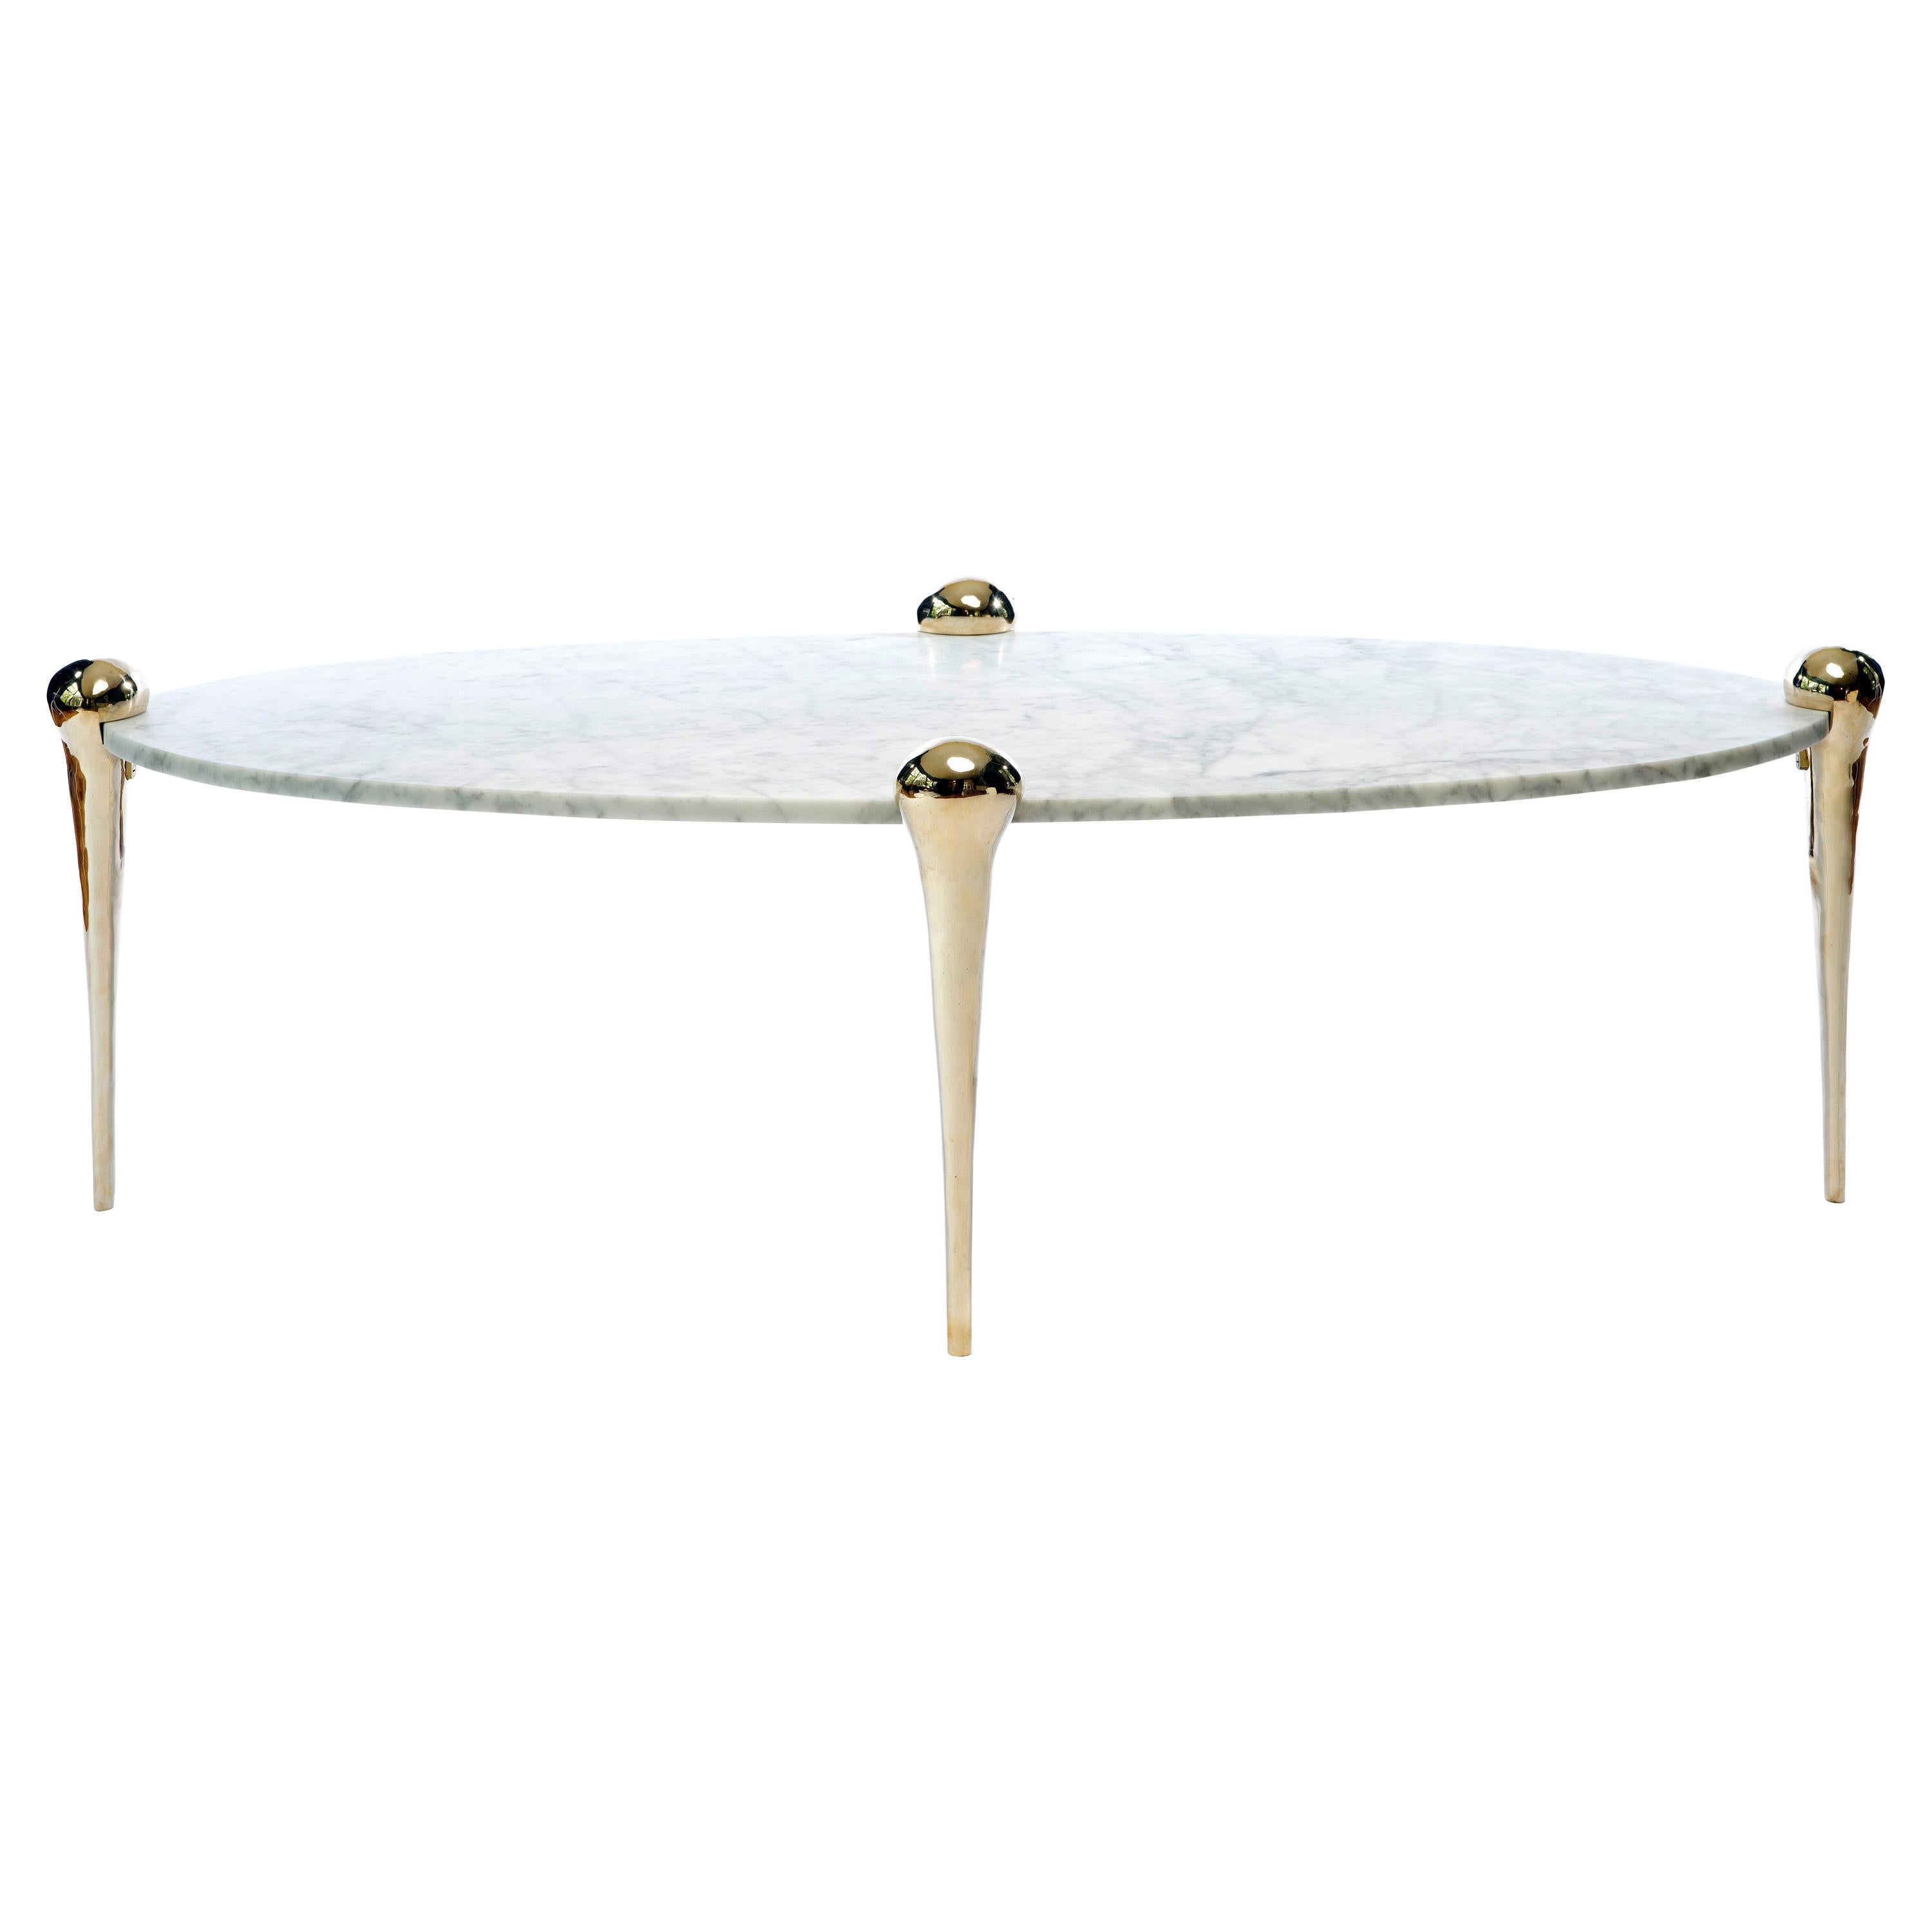 Statuary Marble Petra Coffee Table by Konekt Furniture